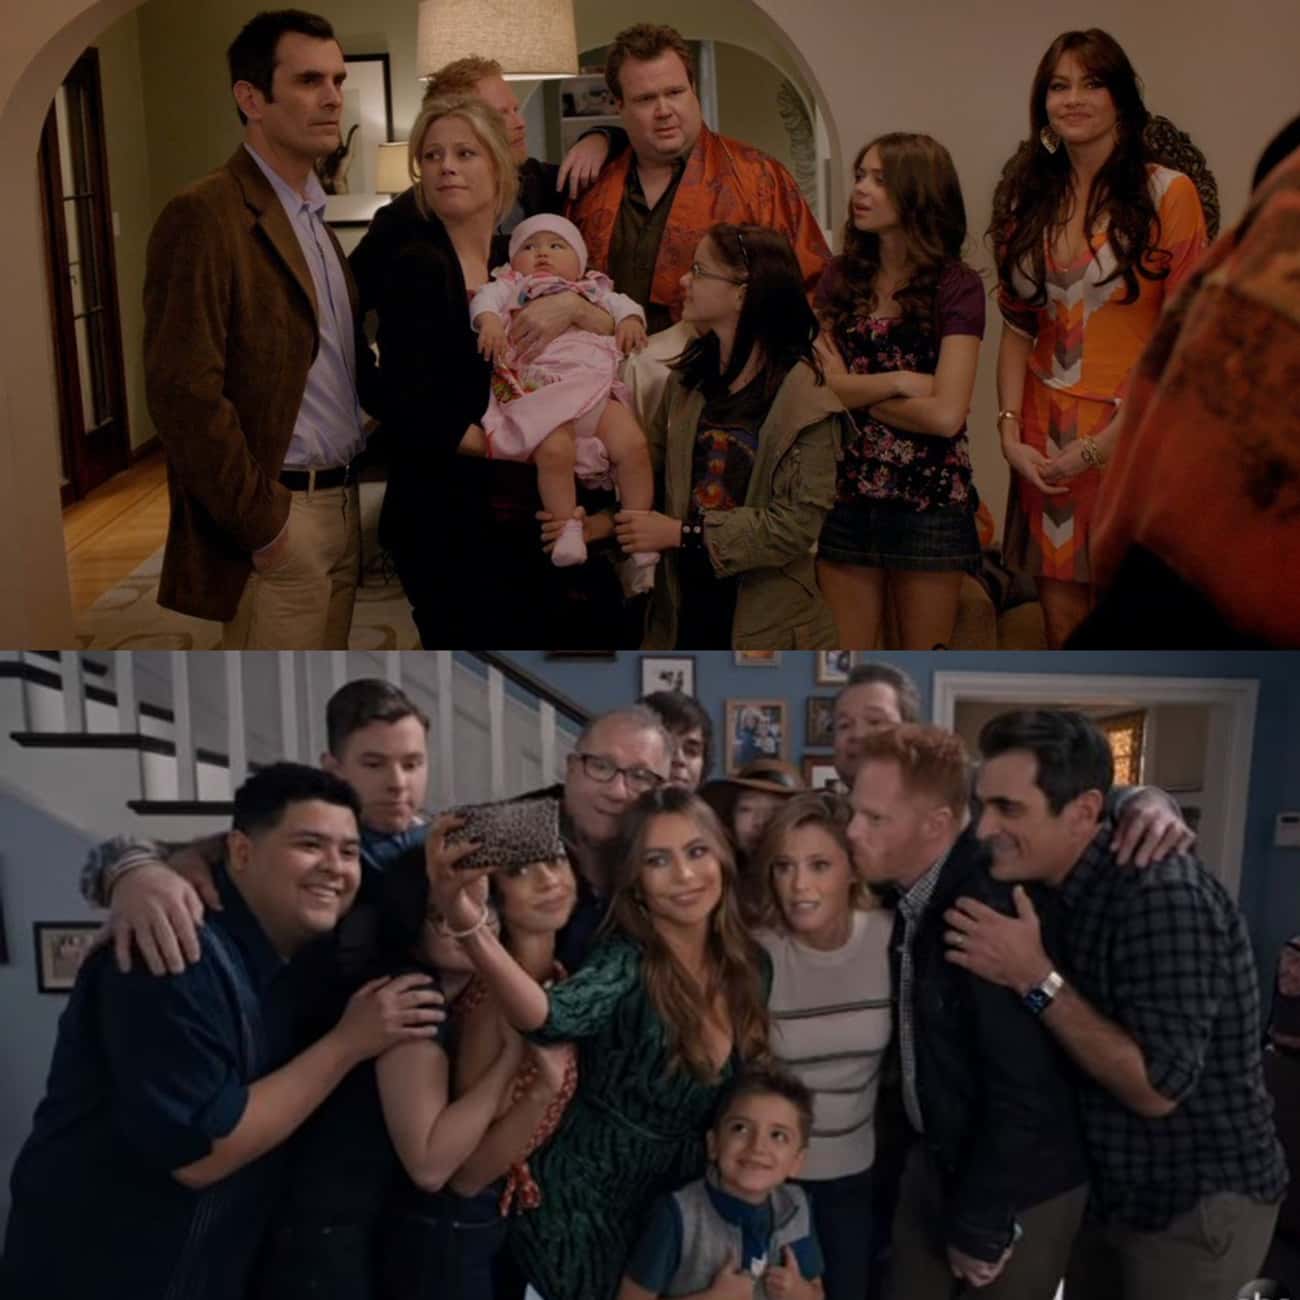 'Modern Family' Season 1 Ends With A Family Portrait That No One Wants To Do; The Series Ends WIth A Family Photo Where No One Wants To Leave